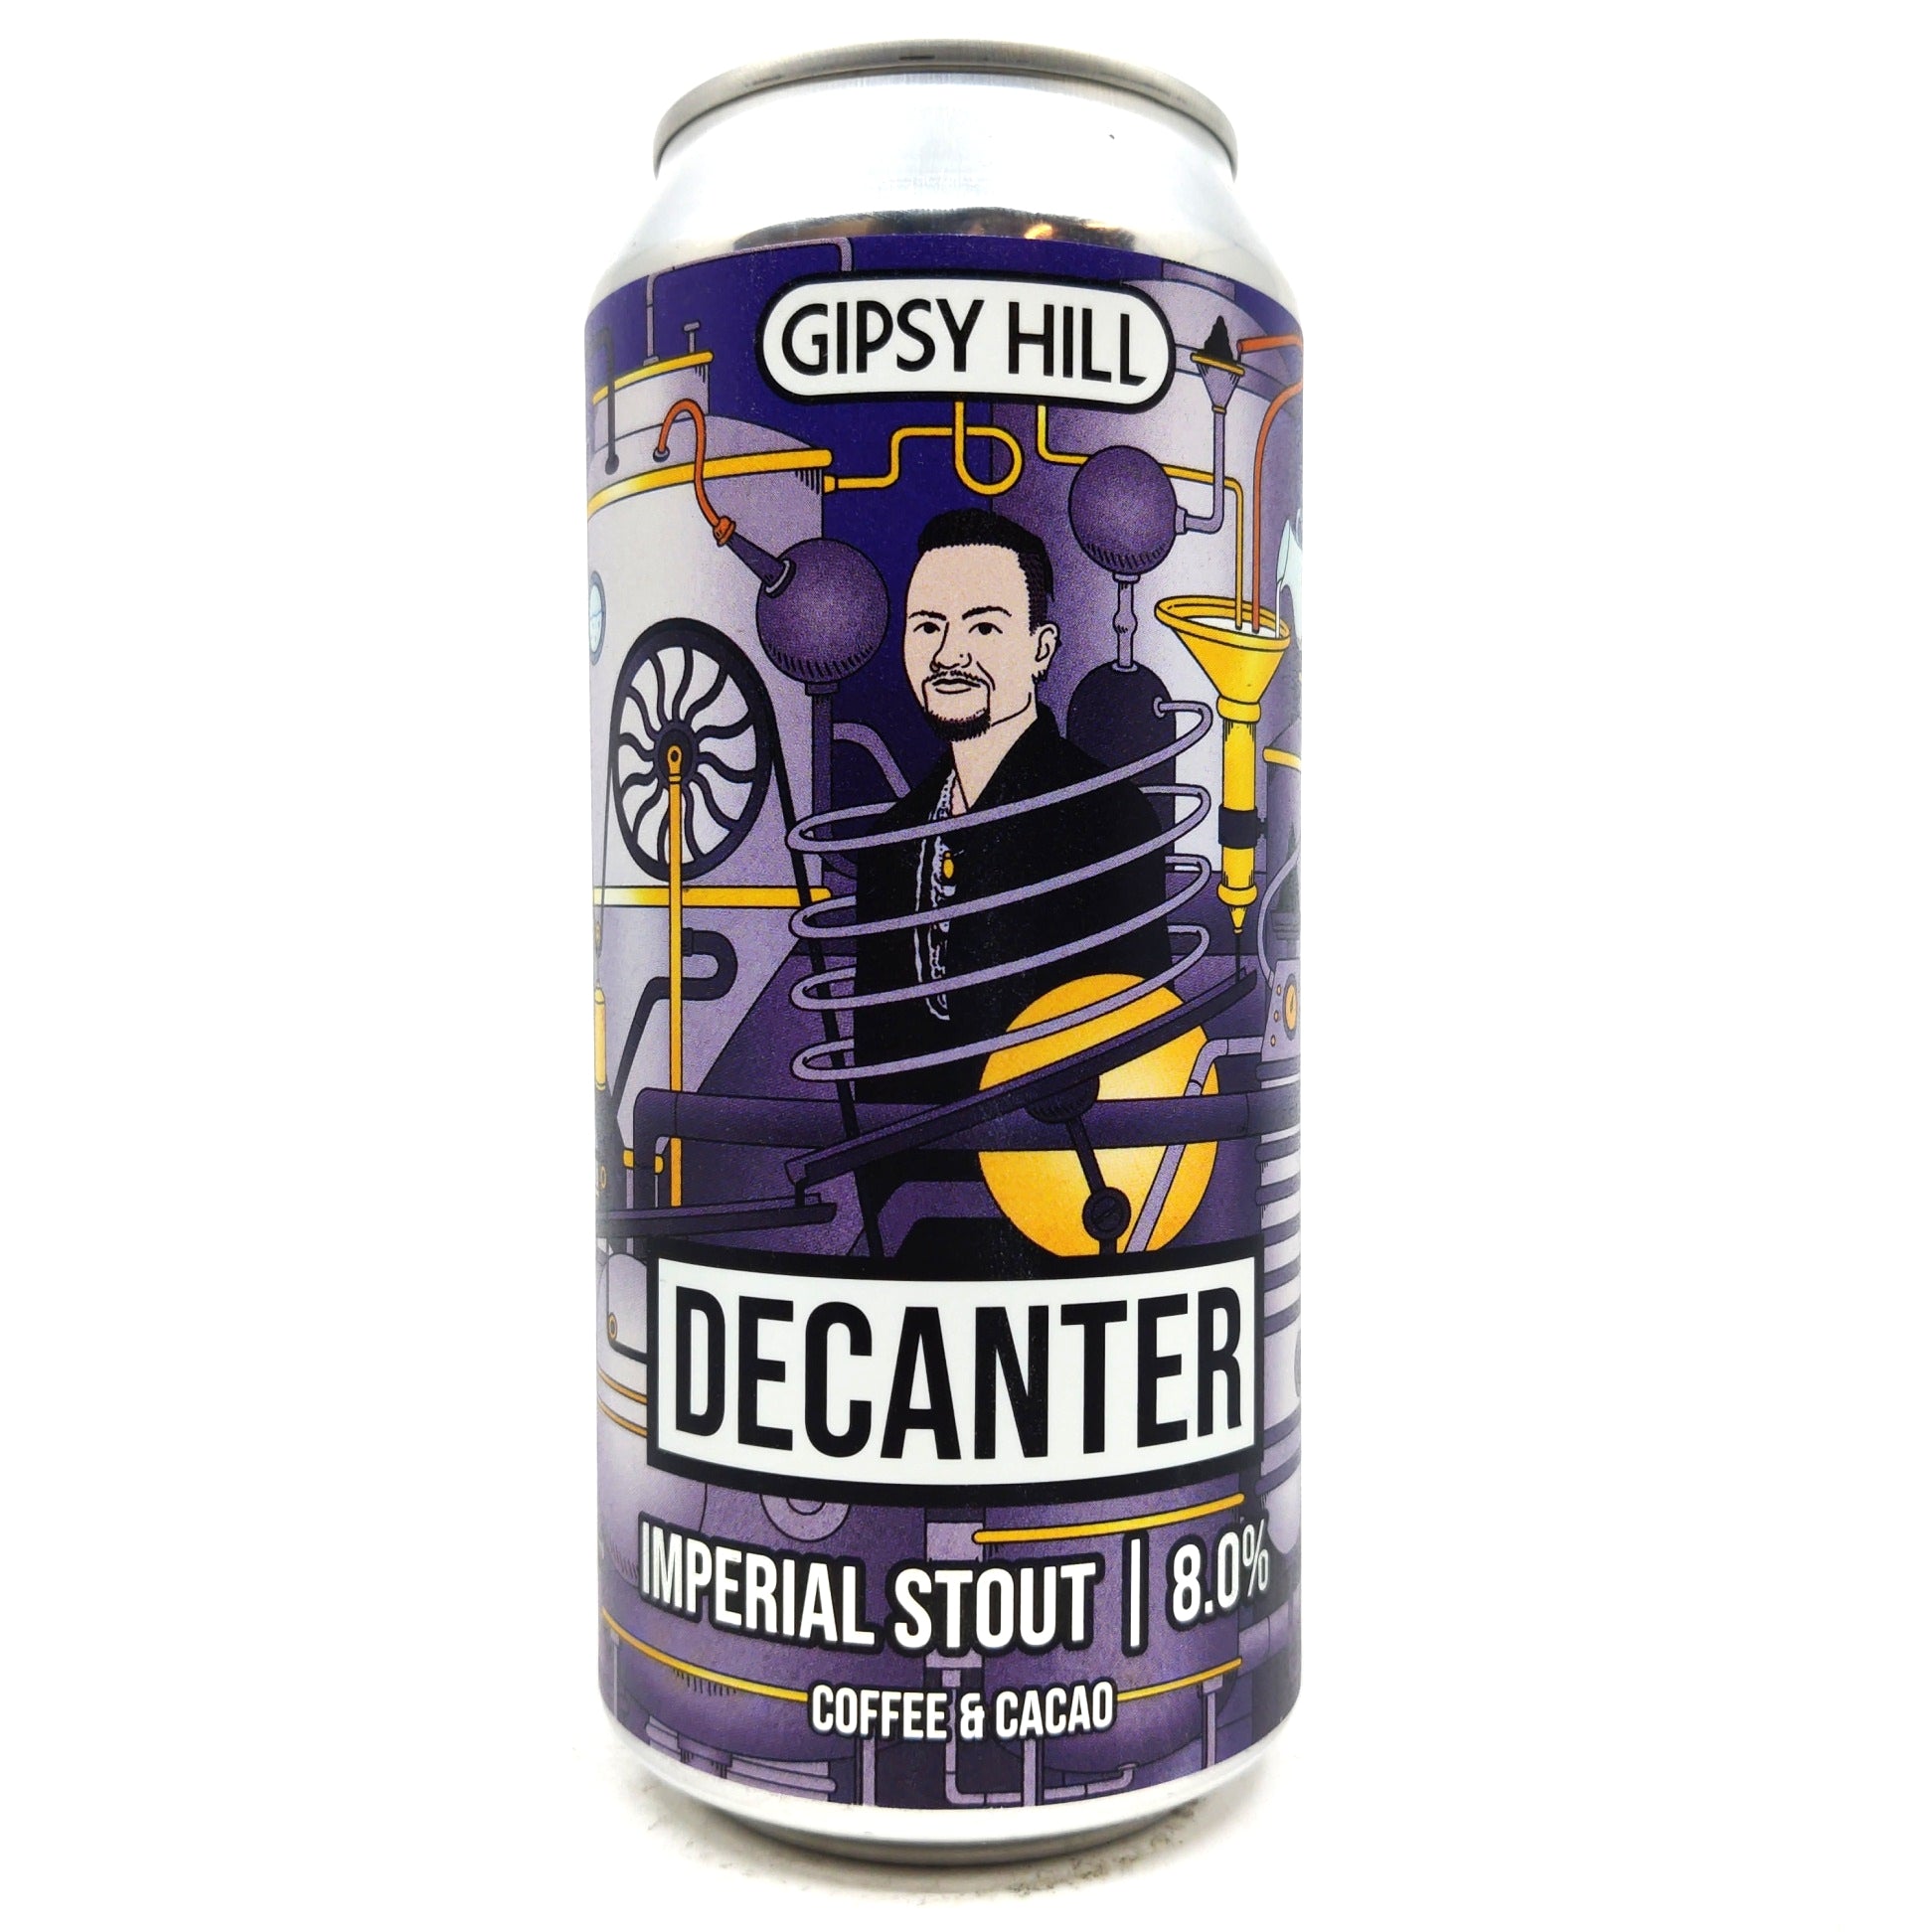 Gipsy Hill Decanter Coffee & Cacao Imperial Stout 8% (440ml can)-Hop Burns & Black